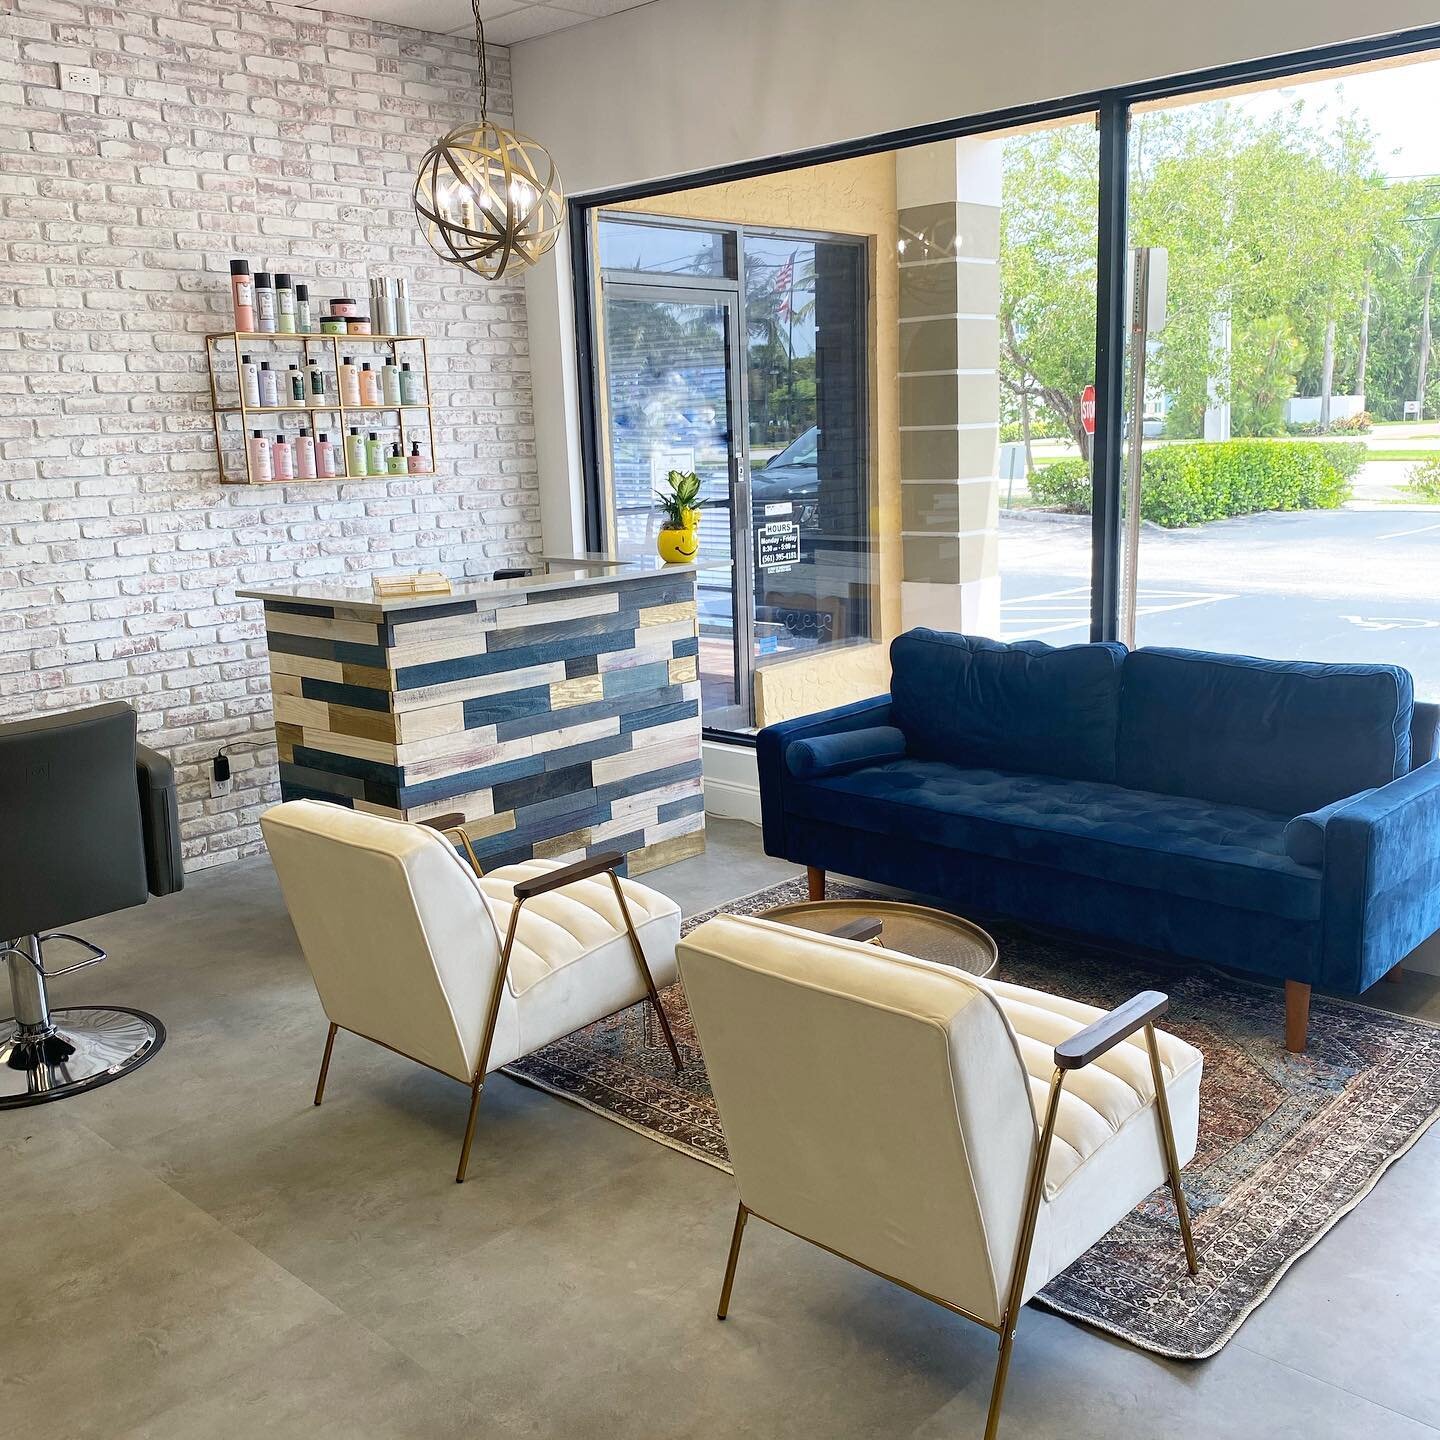 Brand new salon in East Boca Raton, Stormy Skies Salon, is officially open! Come check our team out! 

We offer all hair color and cutting services, extensions, and we even have an amazing and talented aesthetician @selfcareloungeboca in a private ro